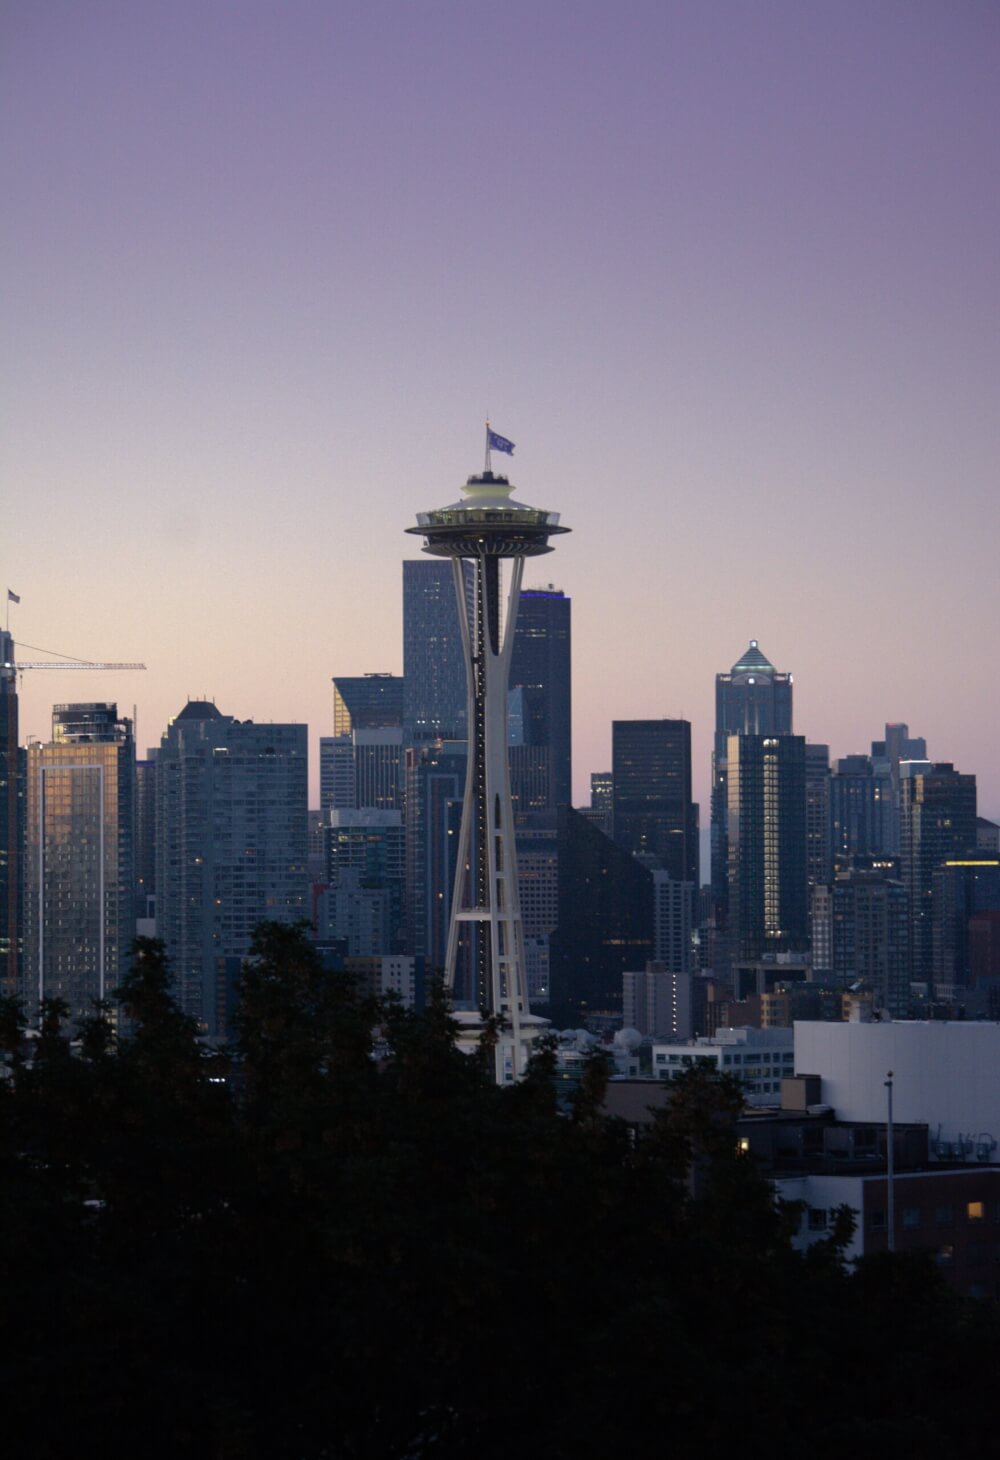 View of the Seattle skyline from Kerry Park